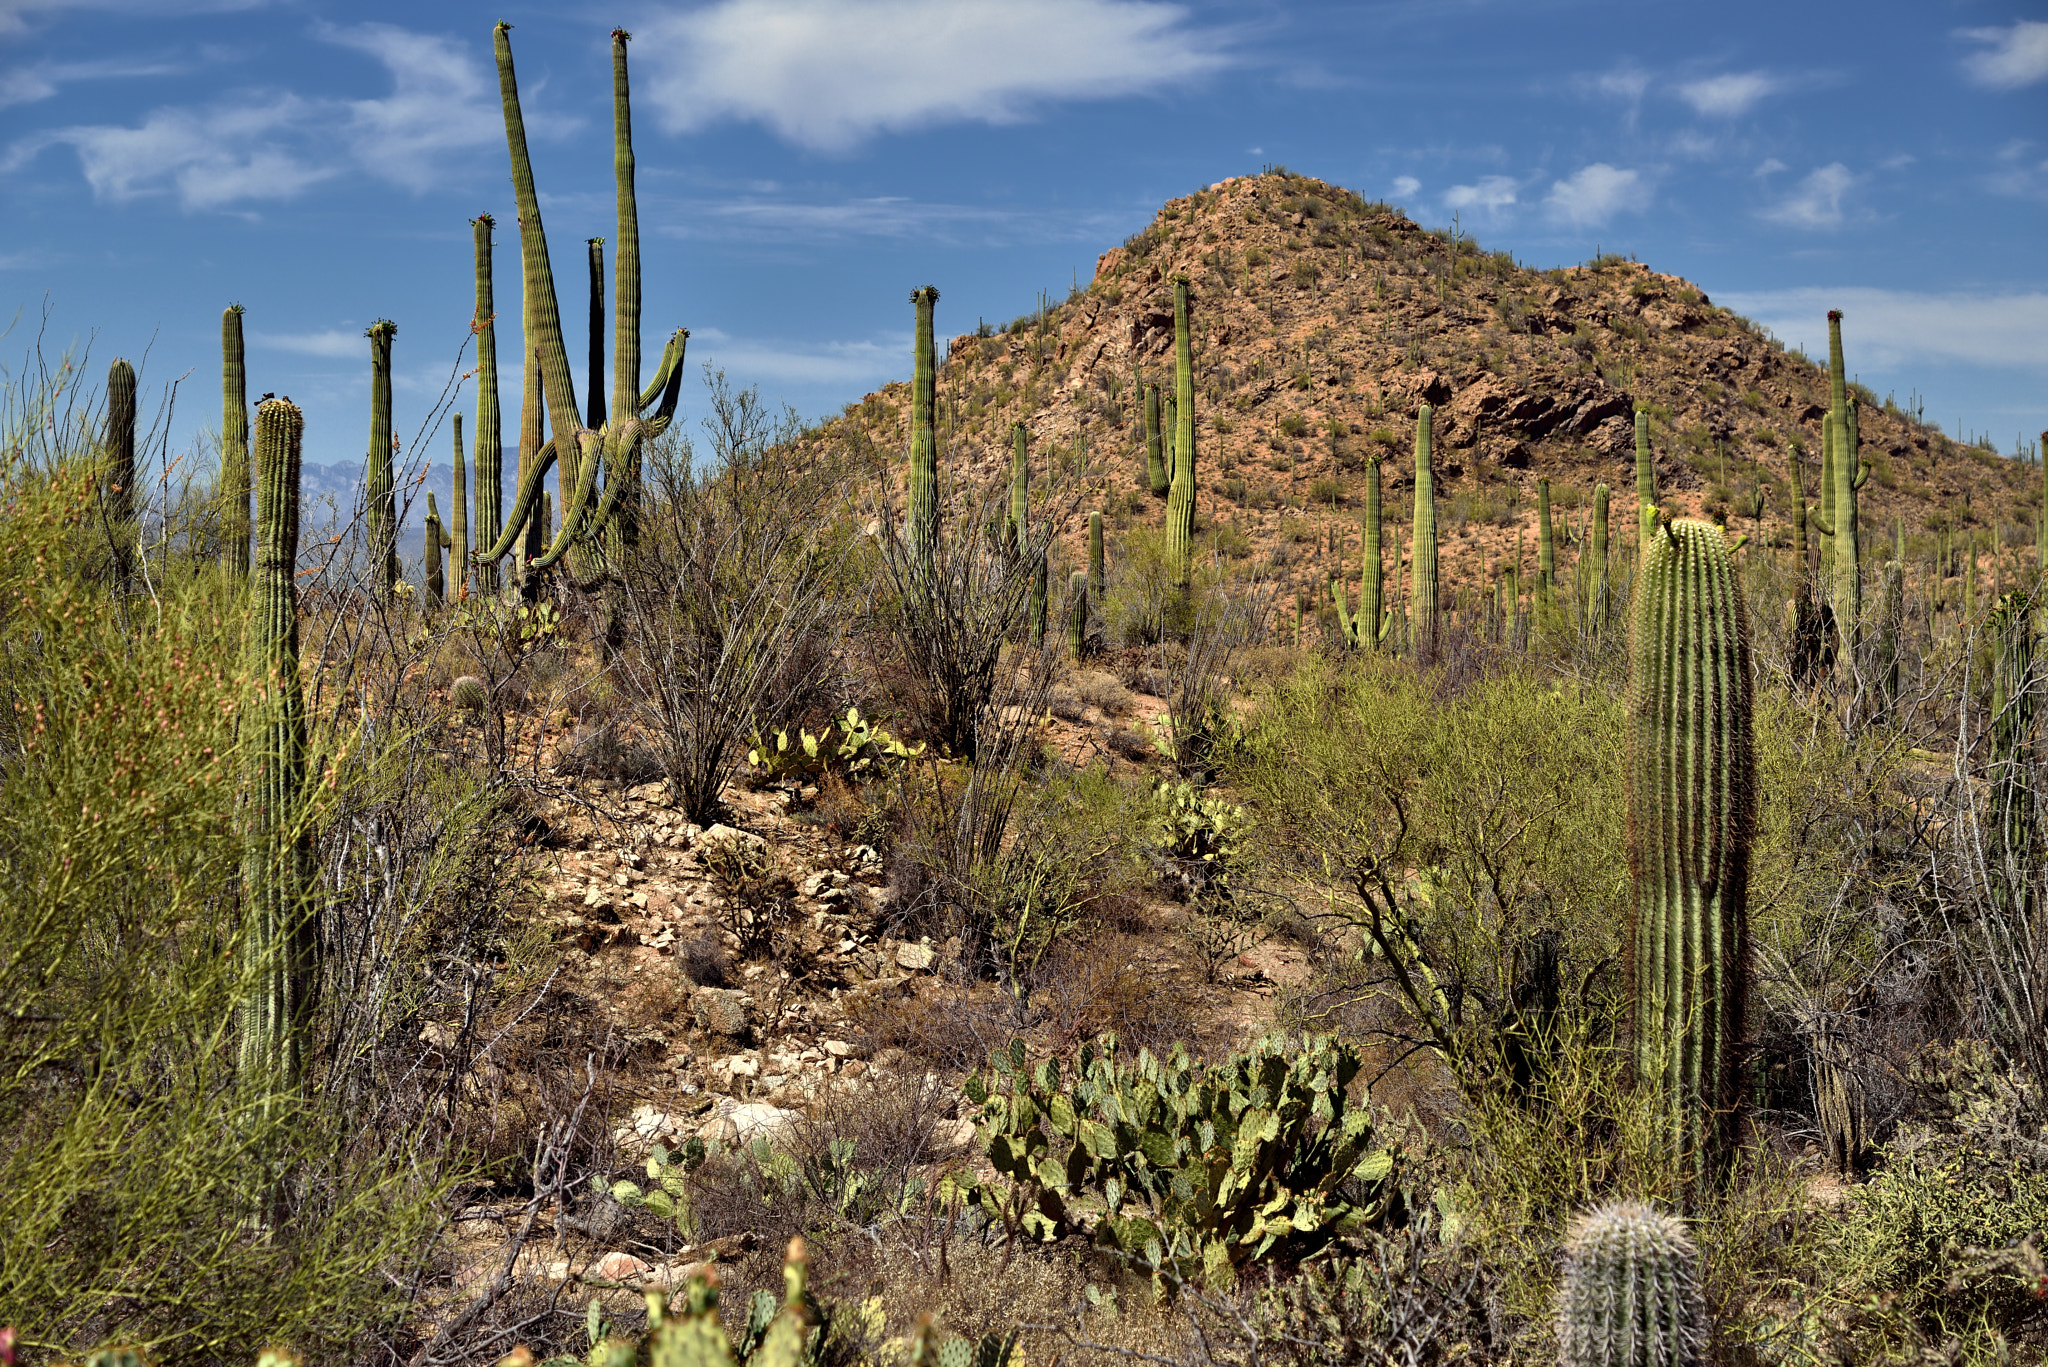 Nikon D800E sample photo. Hills, blues skies and clouds for a backdrop of saguaro cactus photography